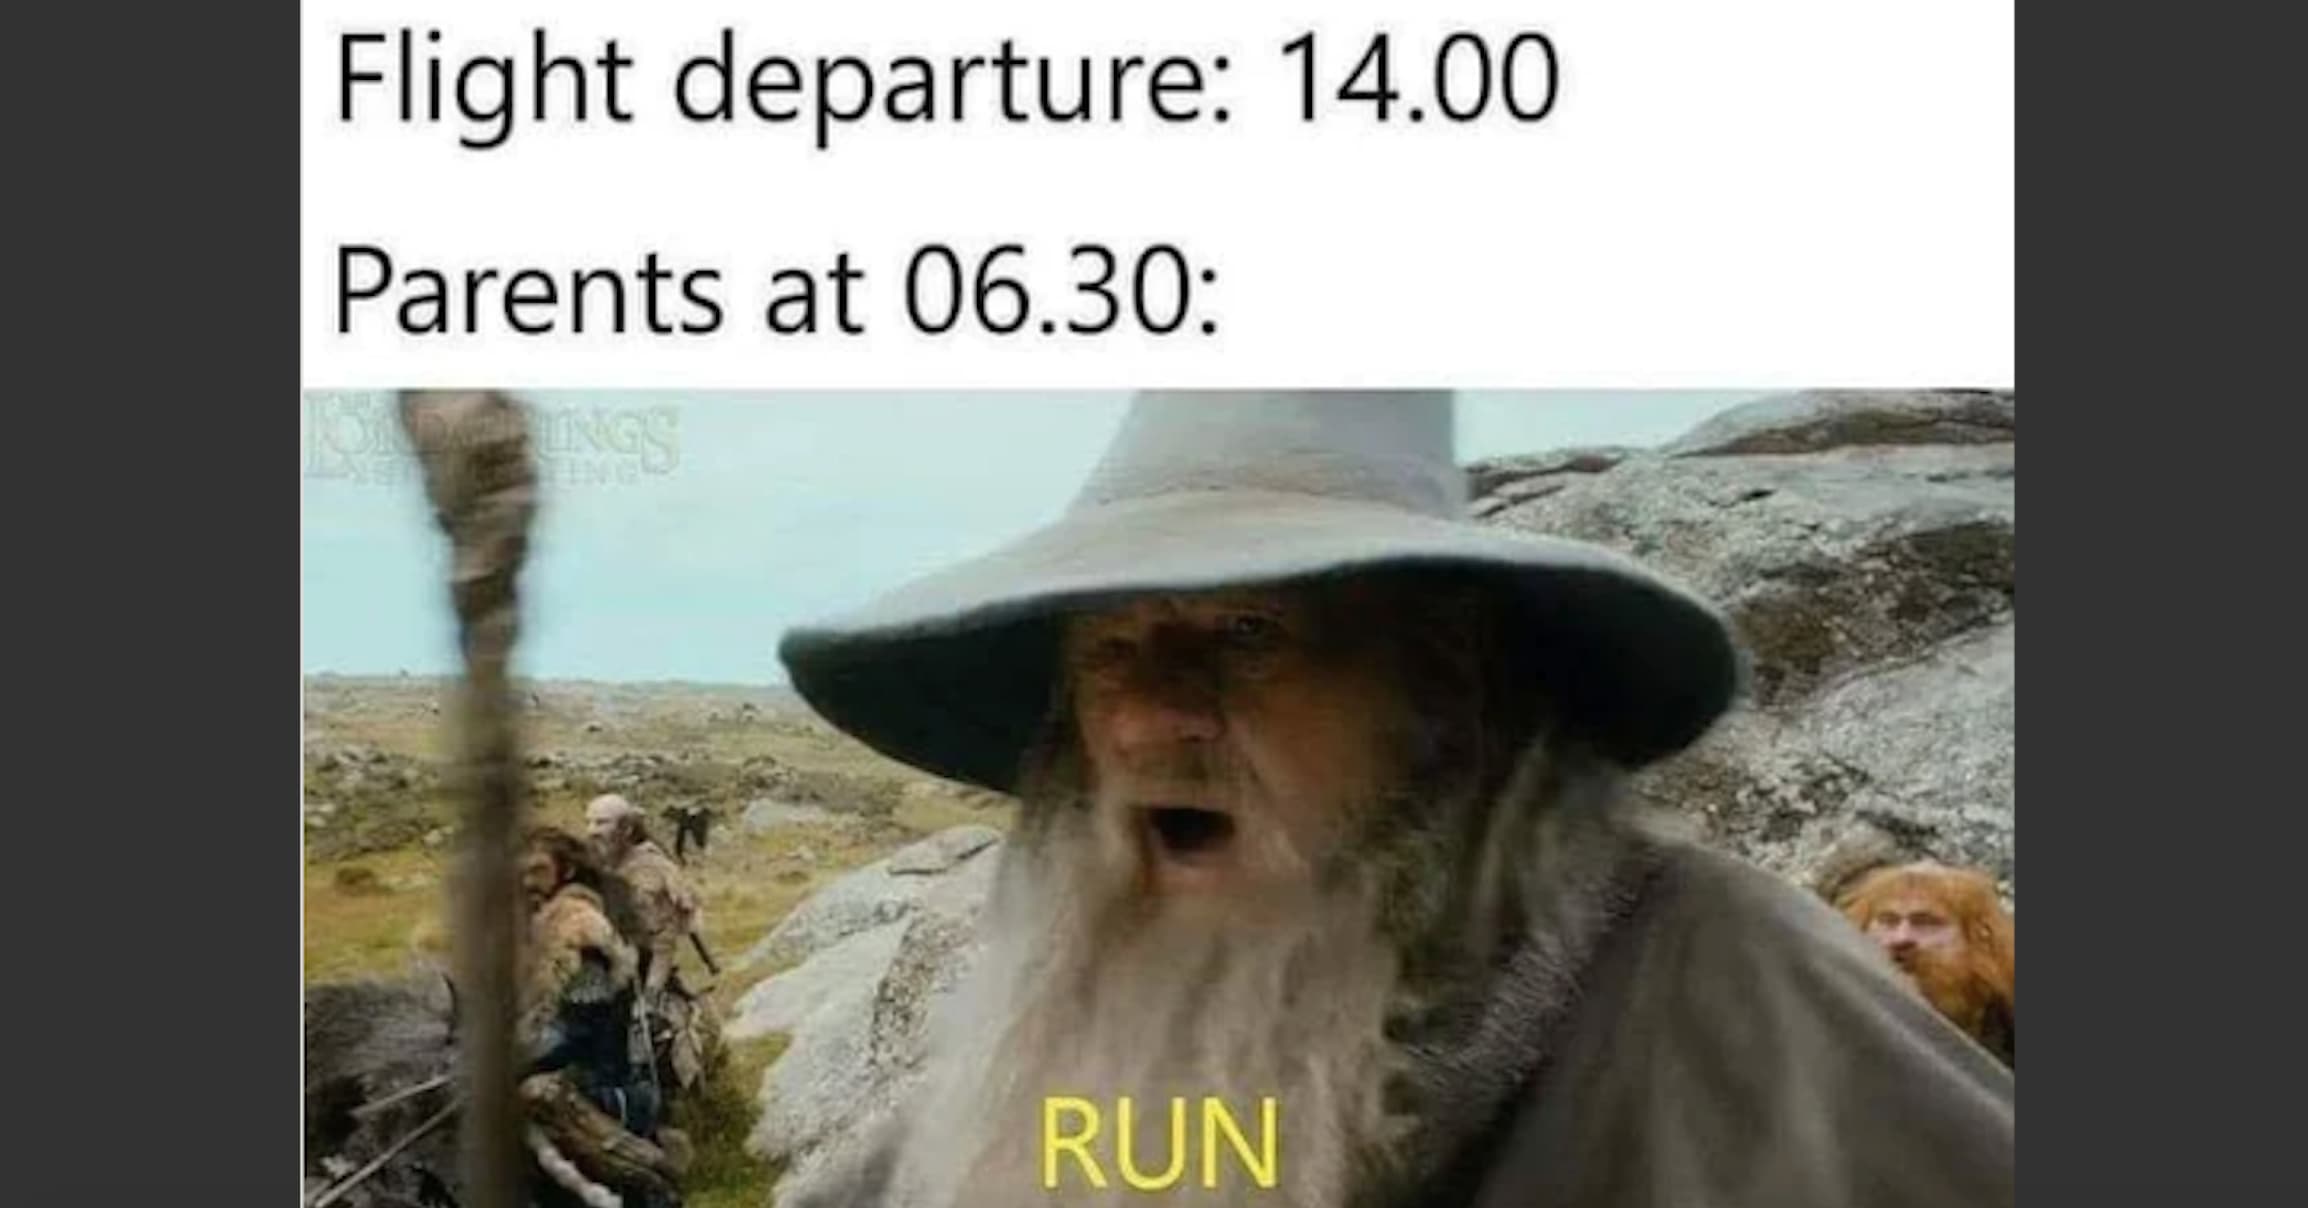 31 Of The Funniest Lord Of The Rings Memes In All Of Middle-earth